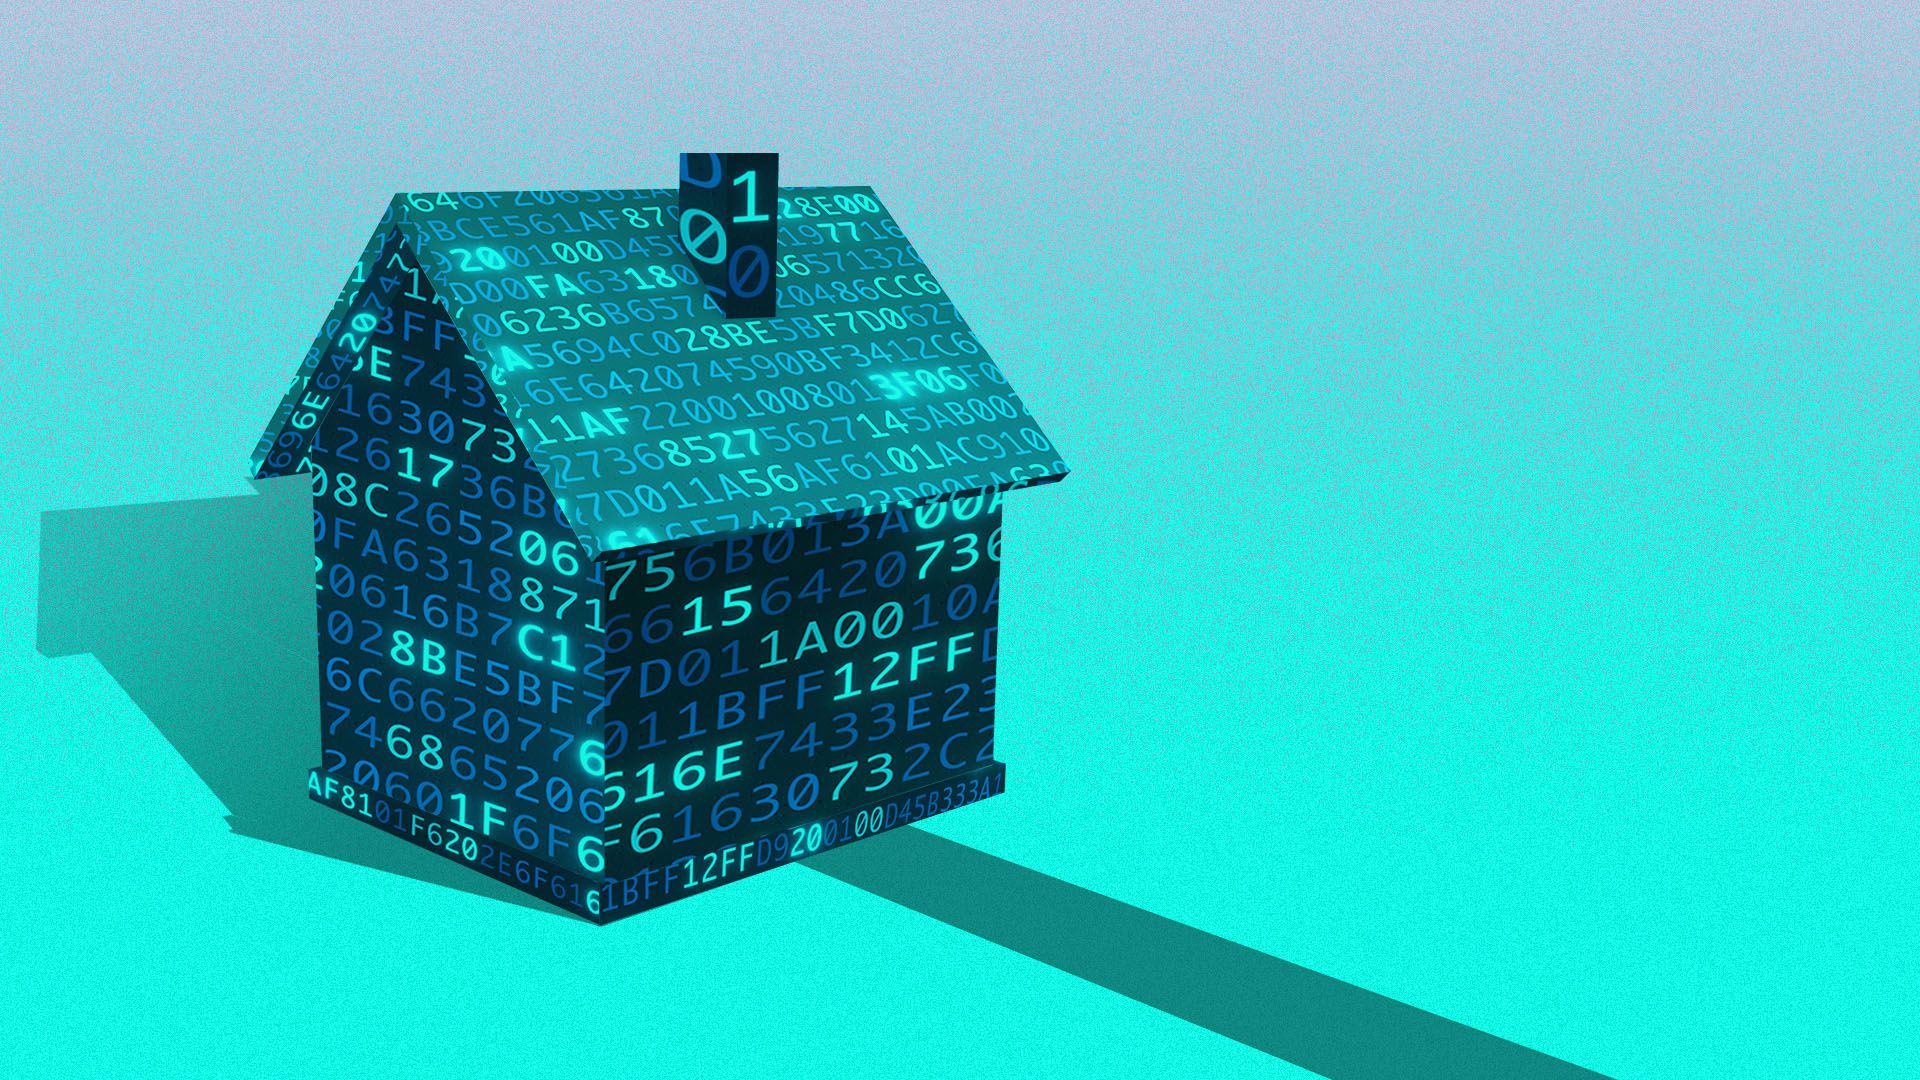 Illustration of a house made out of computer code